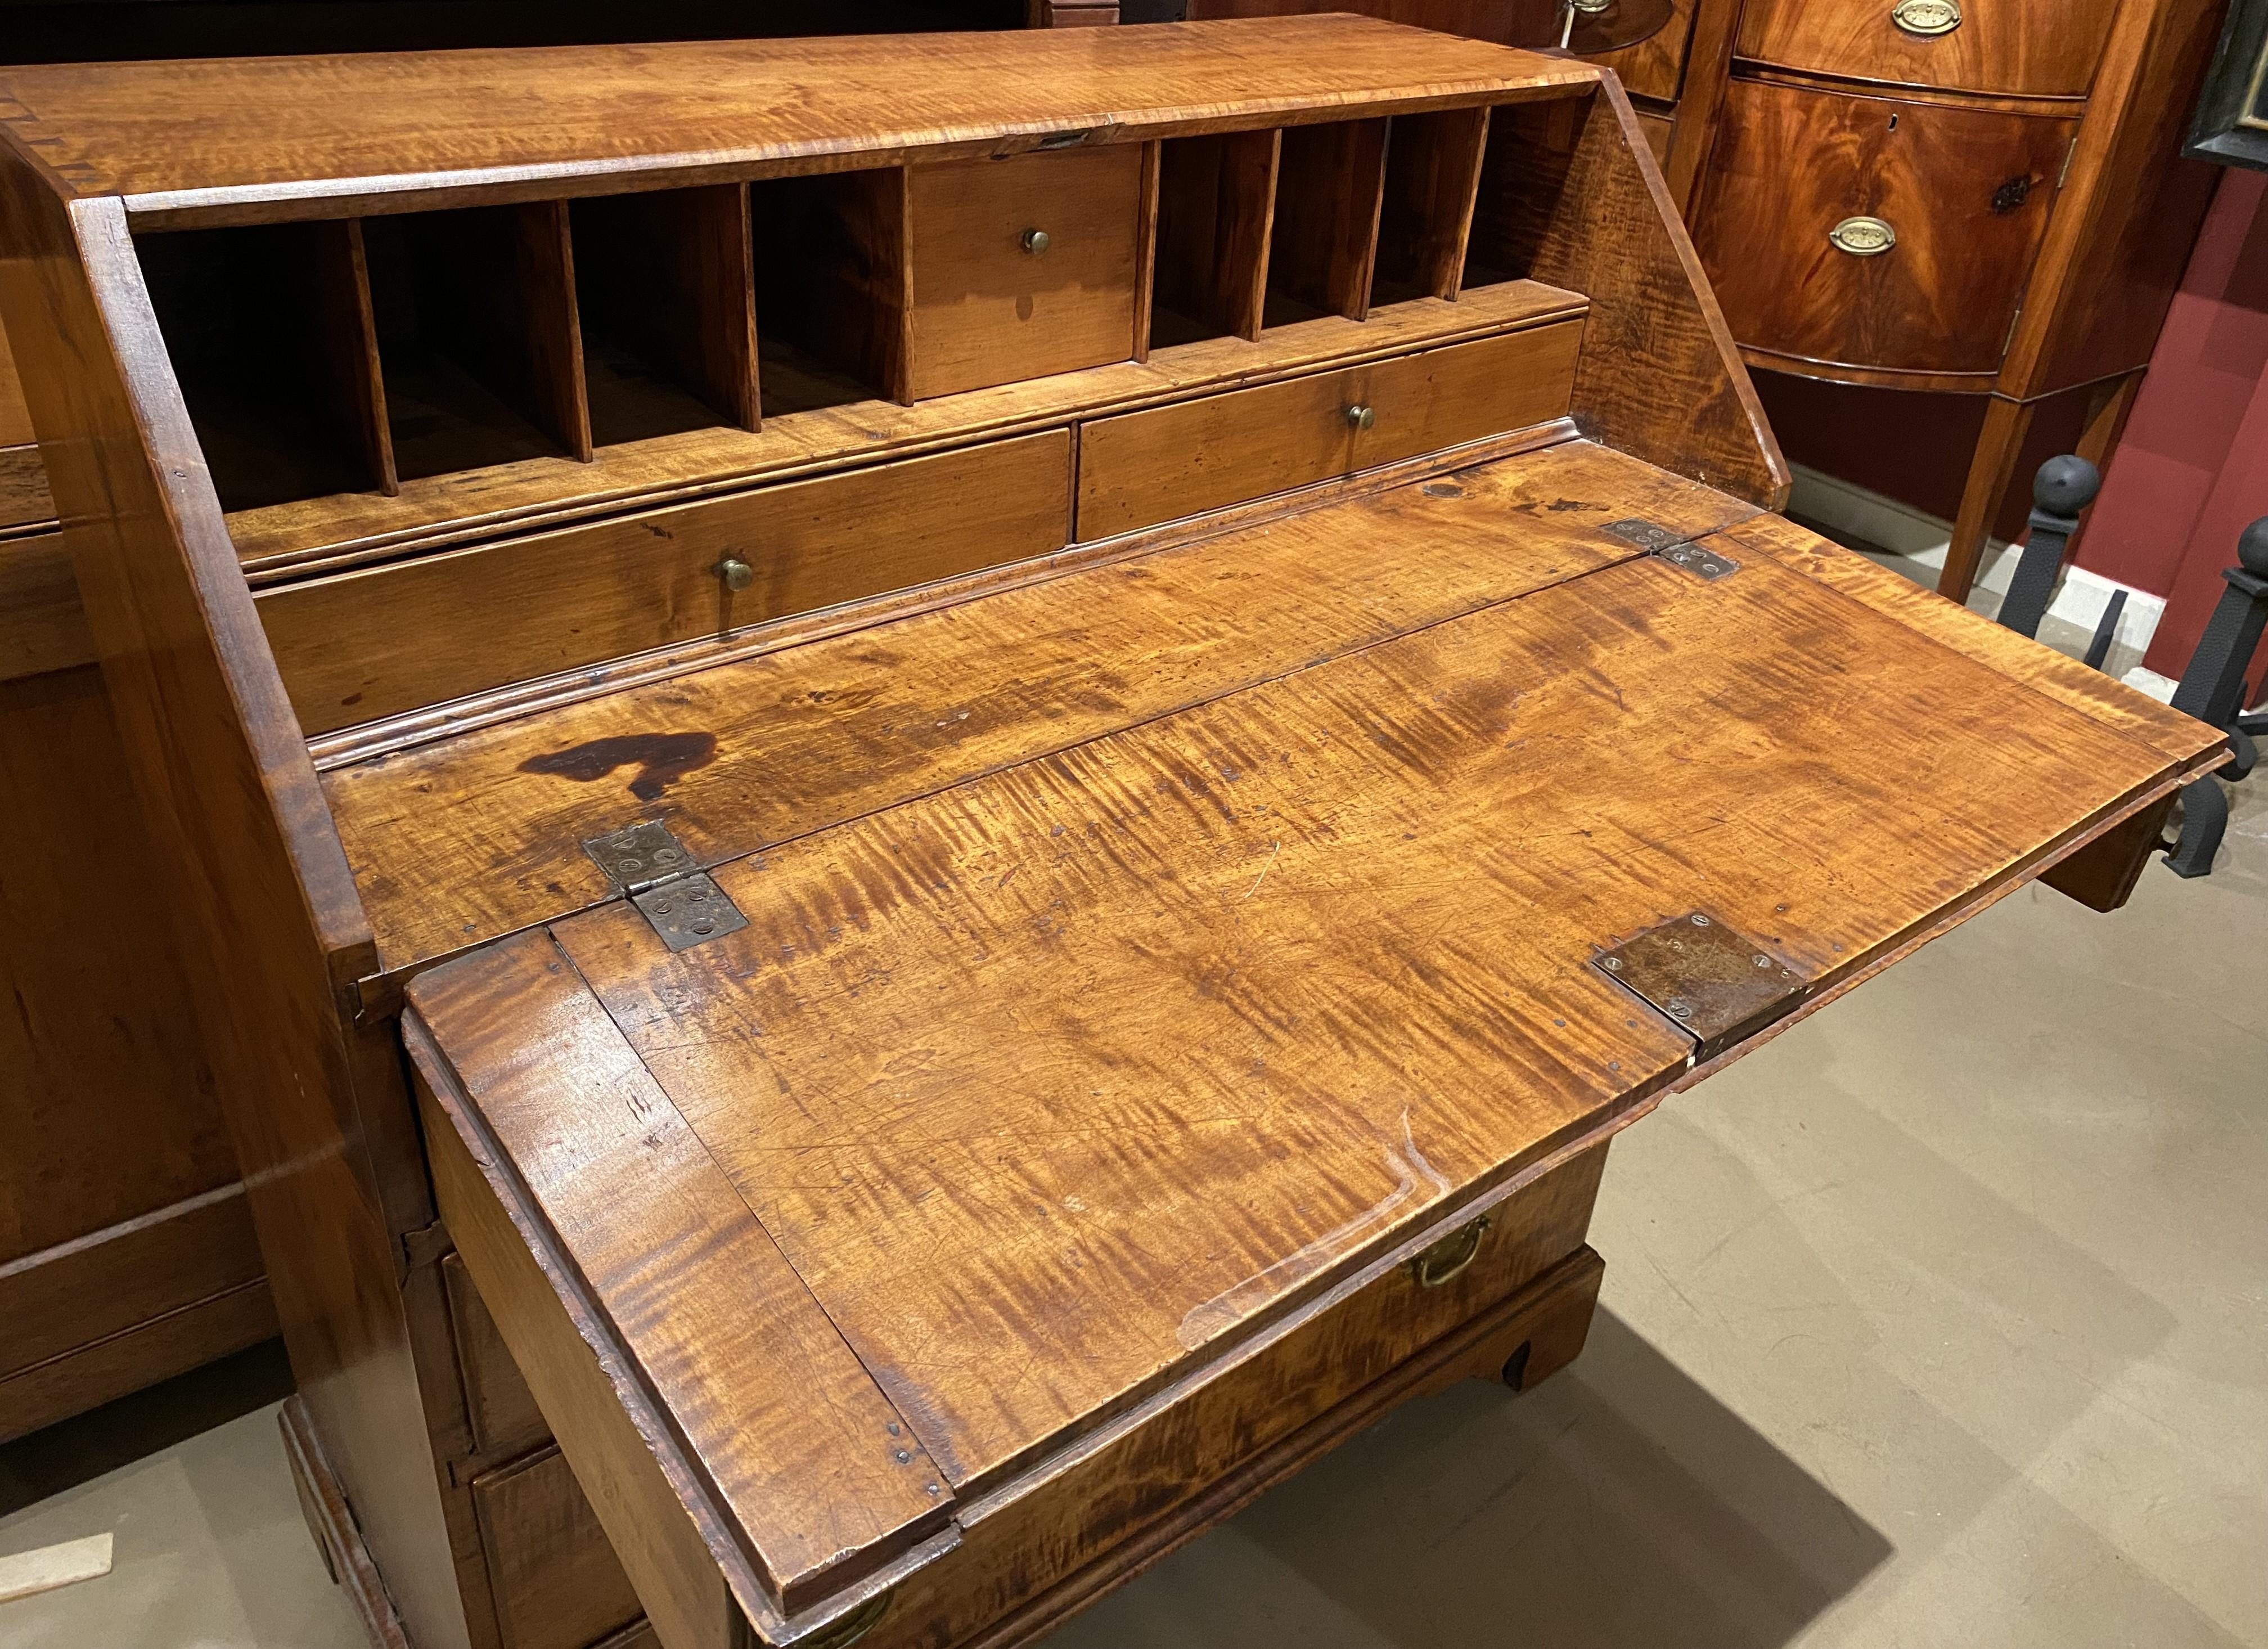 18th Century New England Chippendale Slant Front Desk in Tiger Maple In Good Condition For Sale In Milford, NH